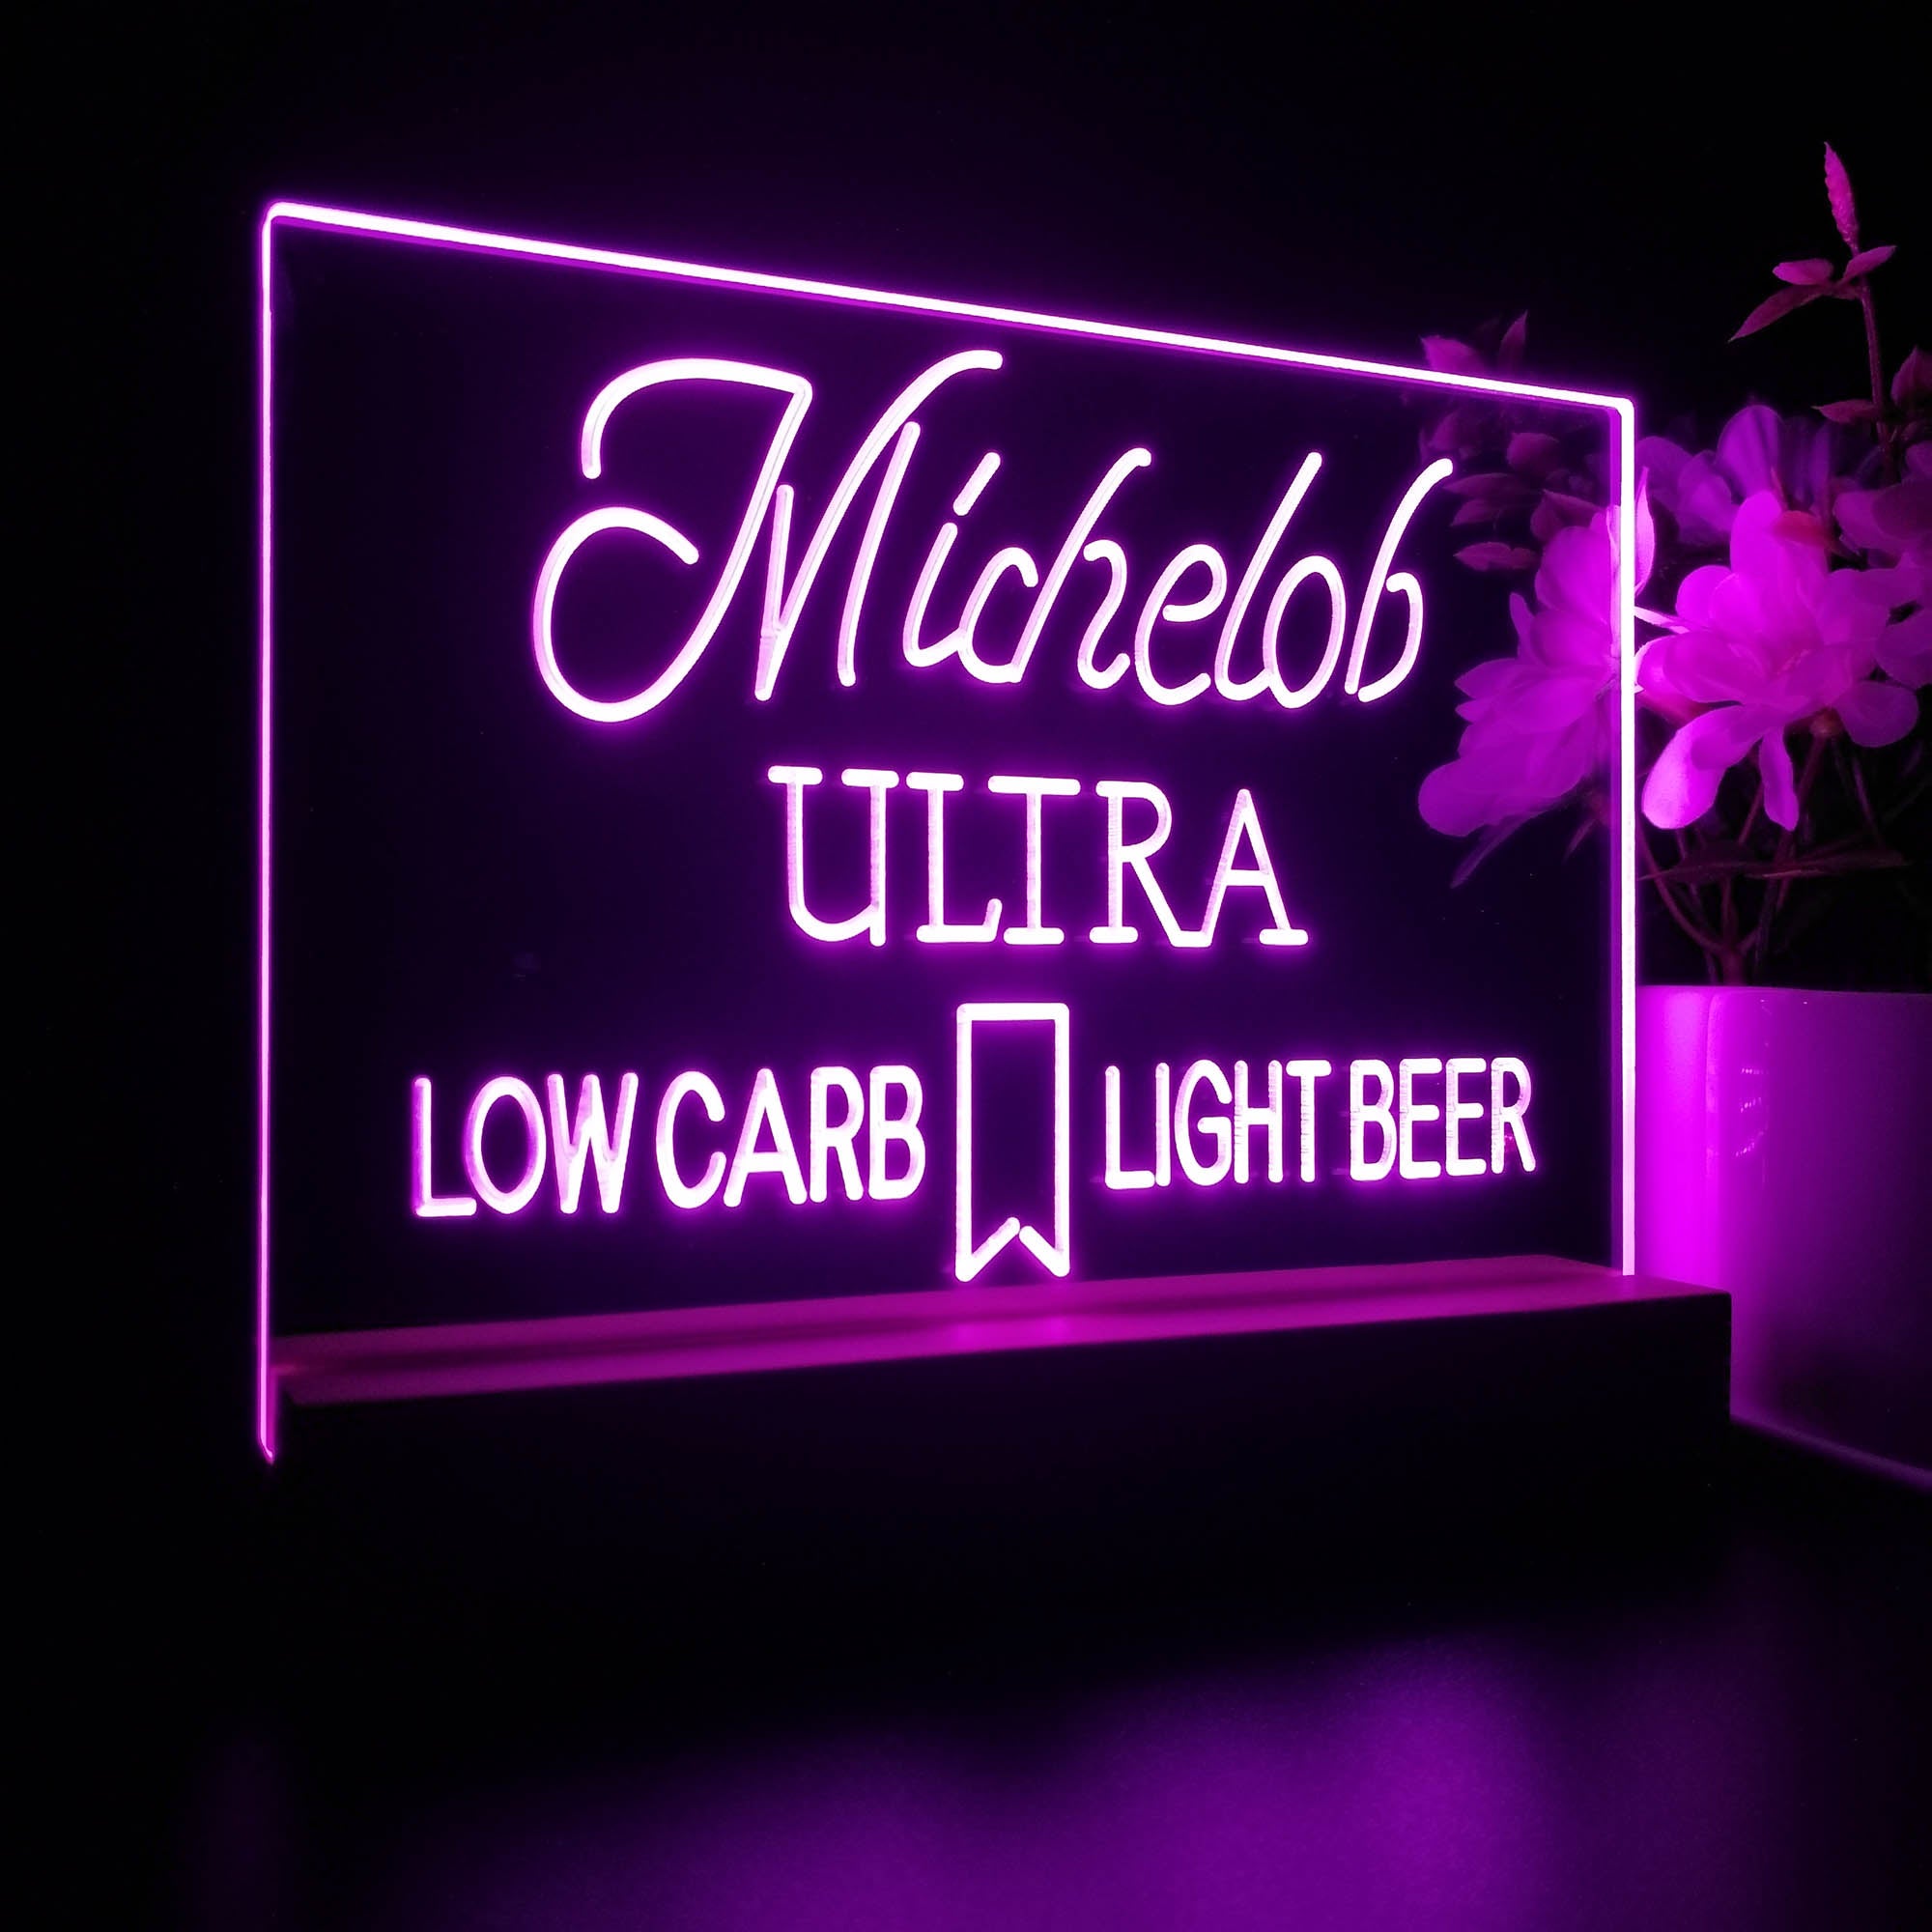 Michelob Ultra Low Carb Light Beer Night Light LED Sign